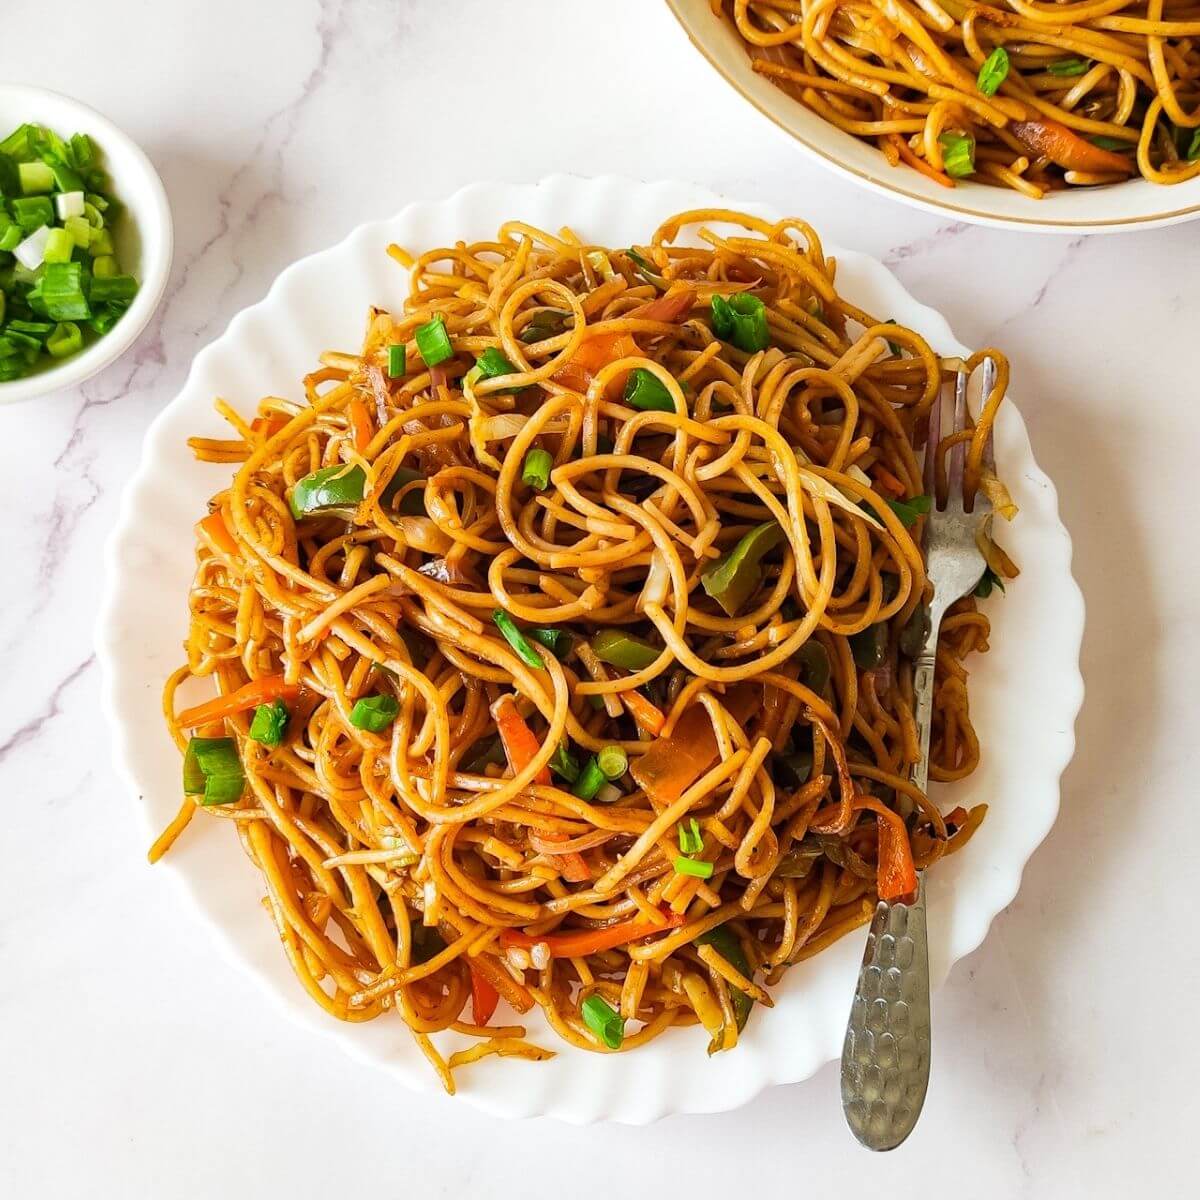 Veg Chow Mein With Vegetables